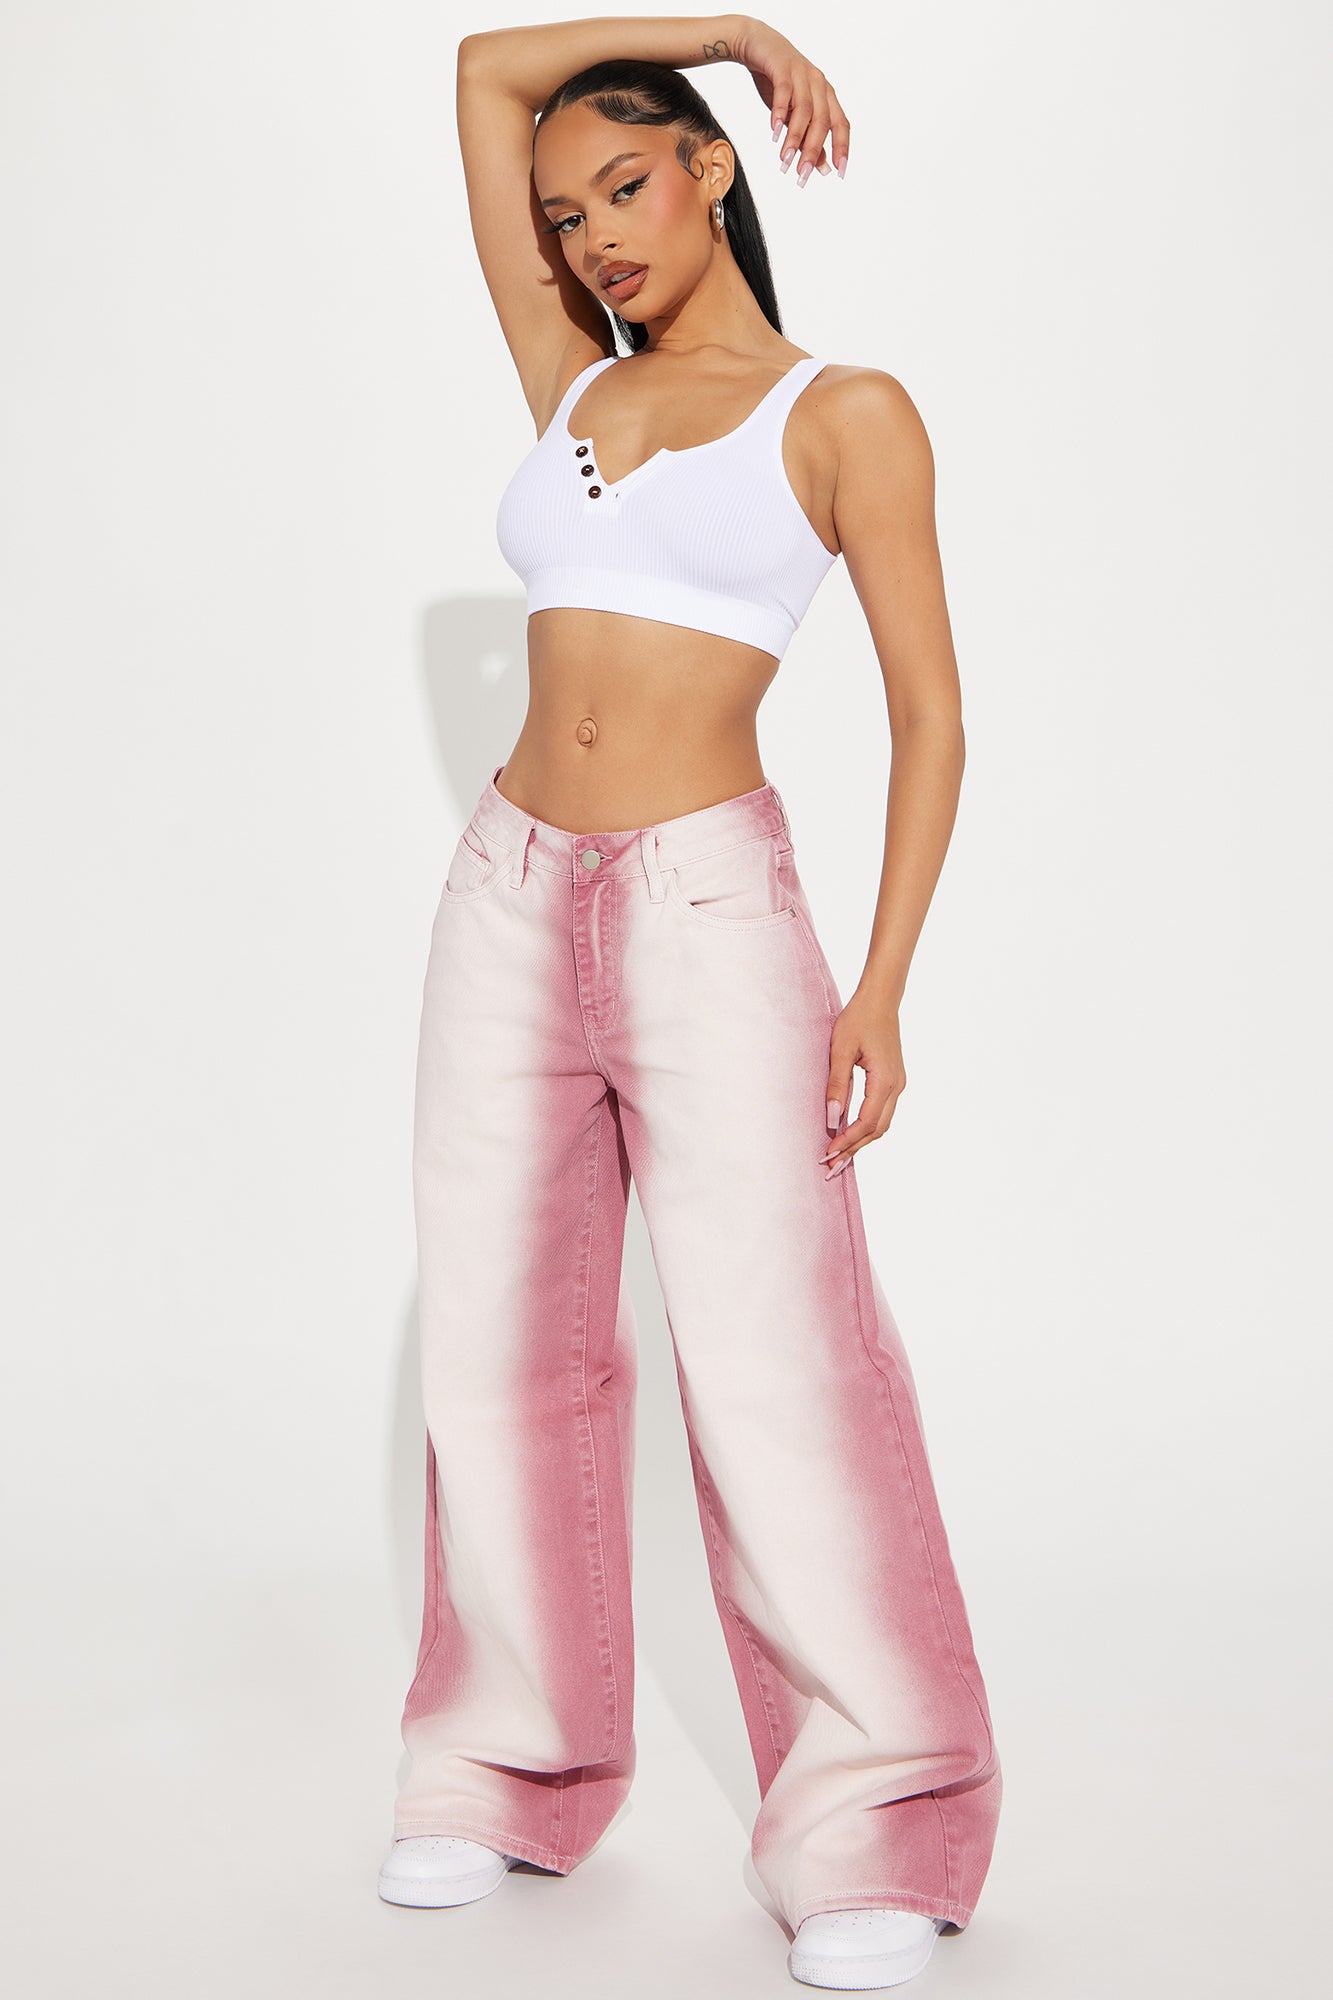 Baggy Jeans, Bra Tops and the Color Pink Have This One Thing In Common